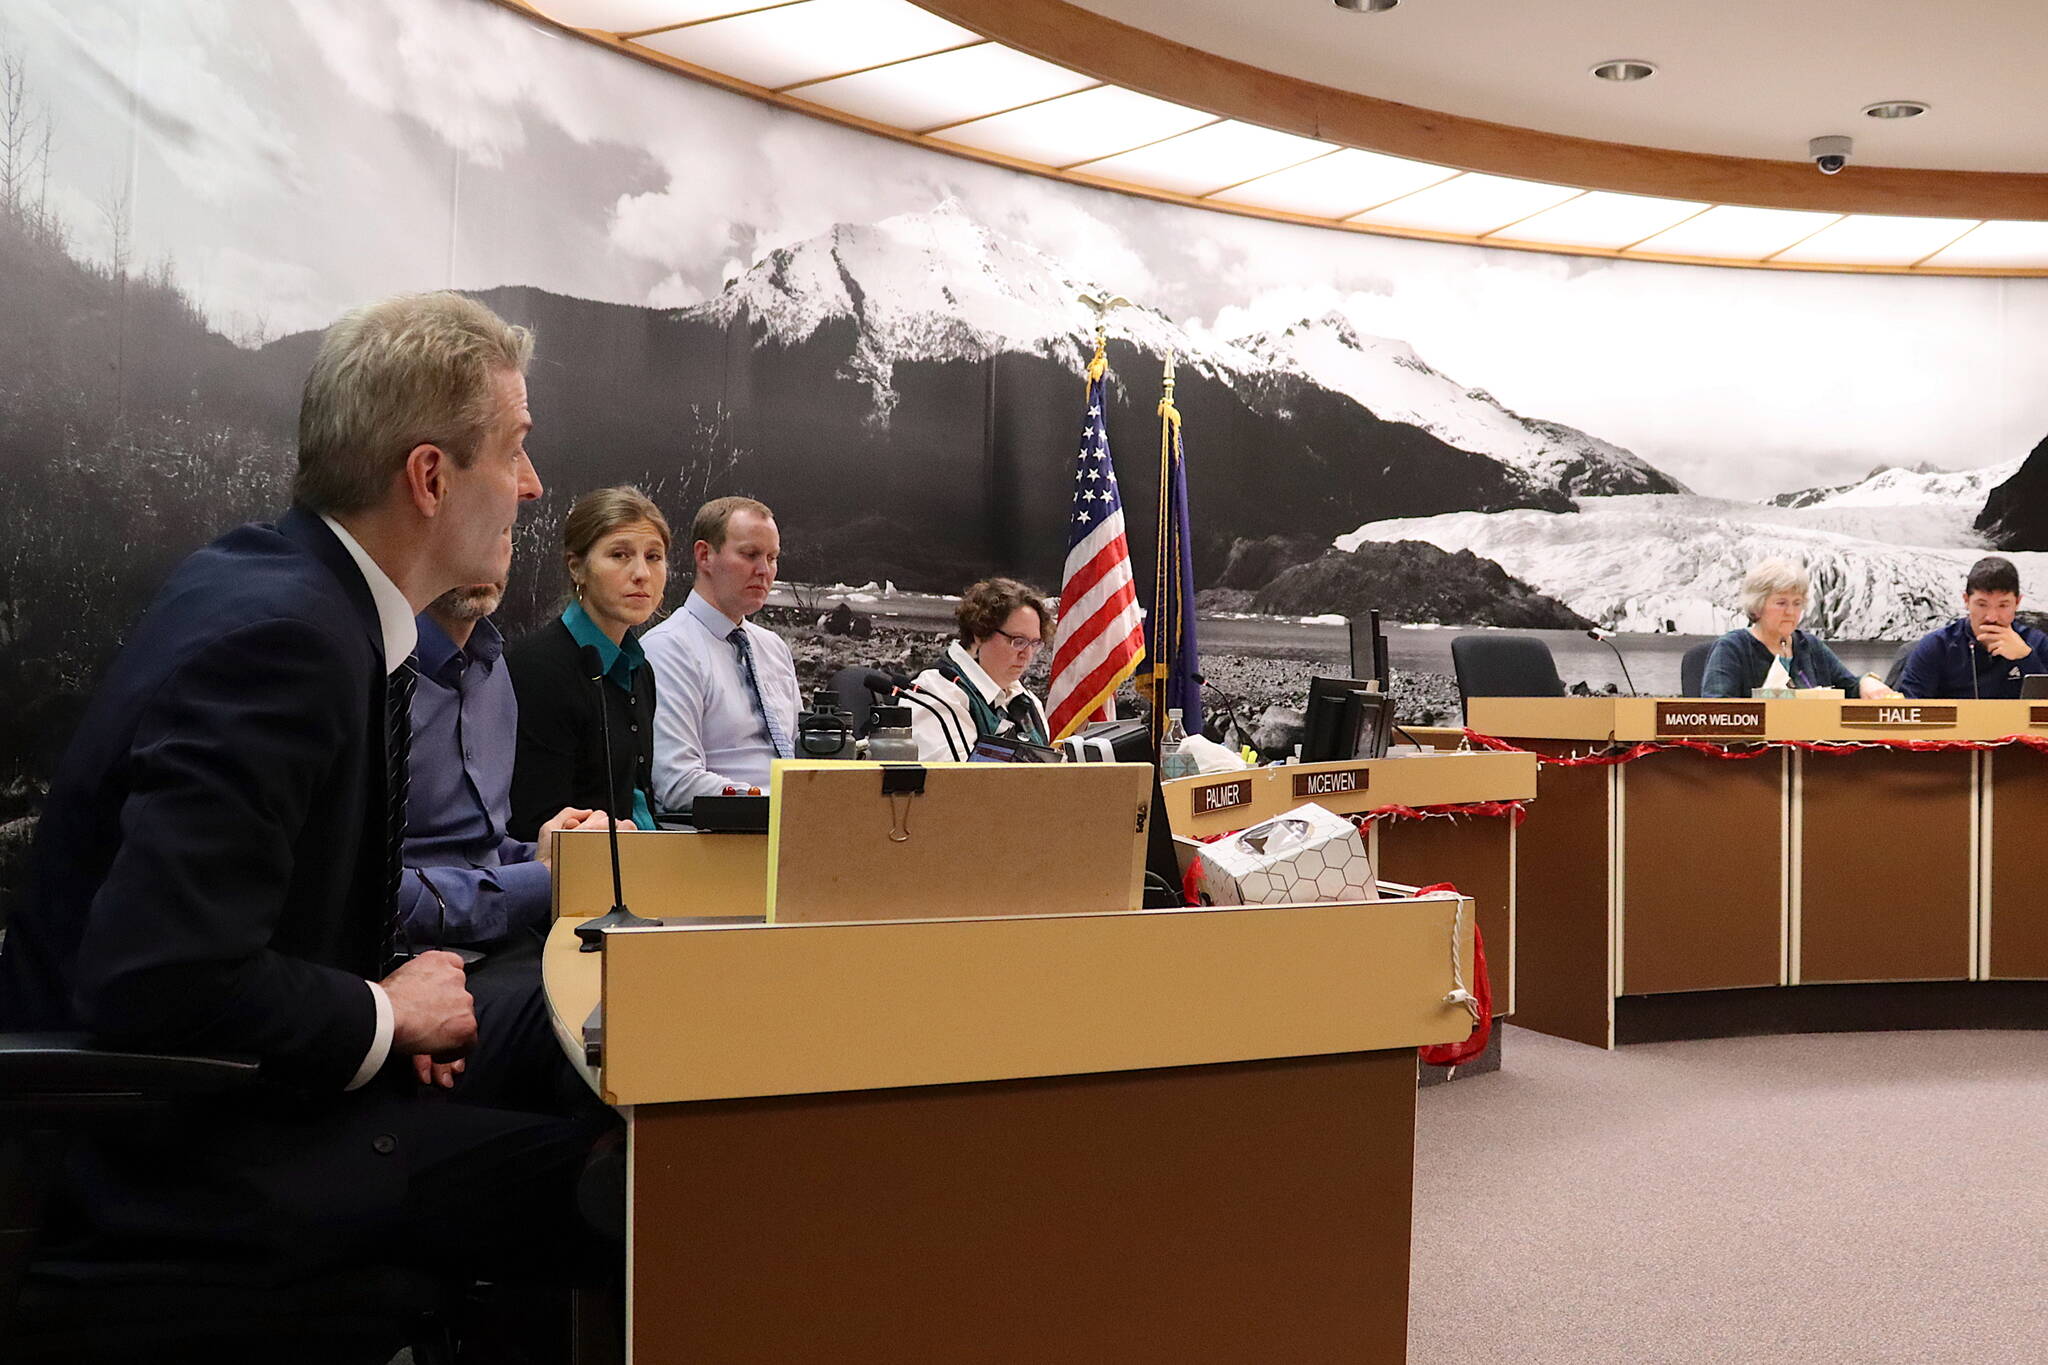 Juneau School District Superintendent Frank Hauser, left, provides an update about the district’s financial situation to Juneau Assembly members and administrative leaders on Monday night at City Hall. A joint meeting of the Assembly and Juneau Board of Education to discuss possible solutions to the district’s financial crisis is scheduled Tuesday night. (Mark Sabbatini / Juneau Empire)